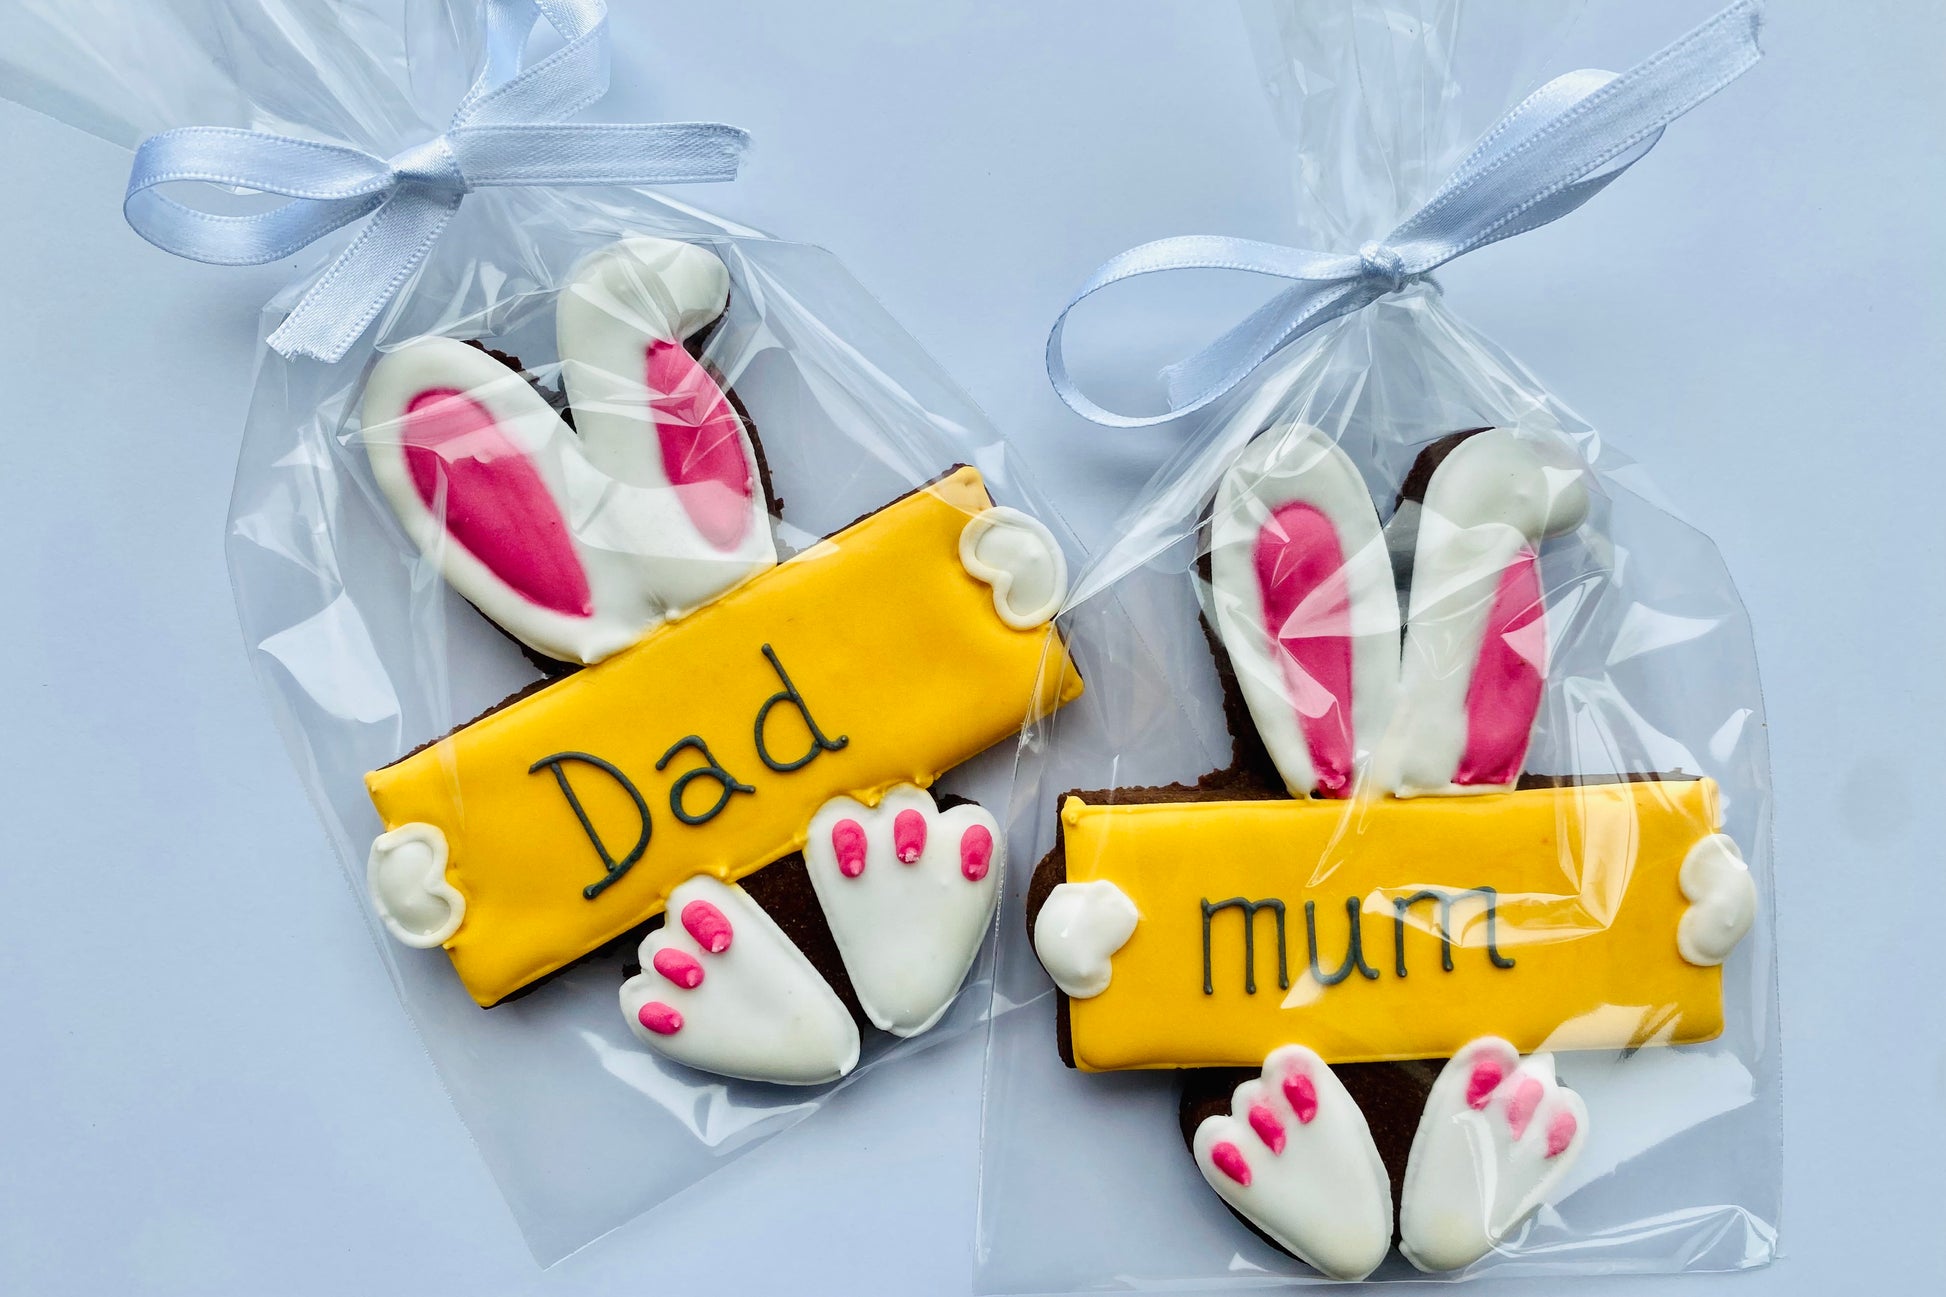 Easter place setting biscuits. Rabbit ears and feet with yellow iced plaque that can be personalised with an iced name perfect for an Easter table.